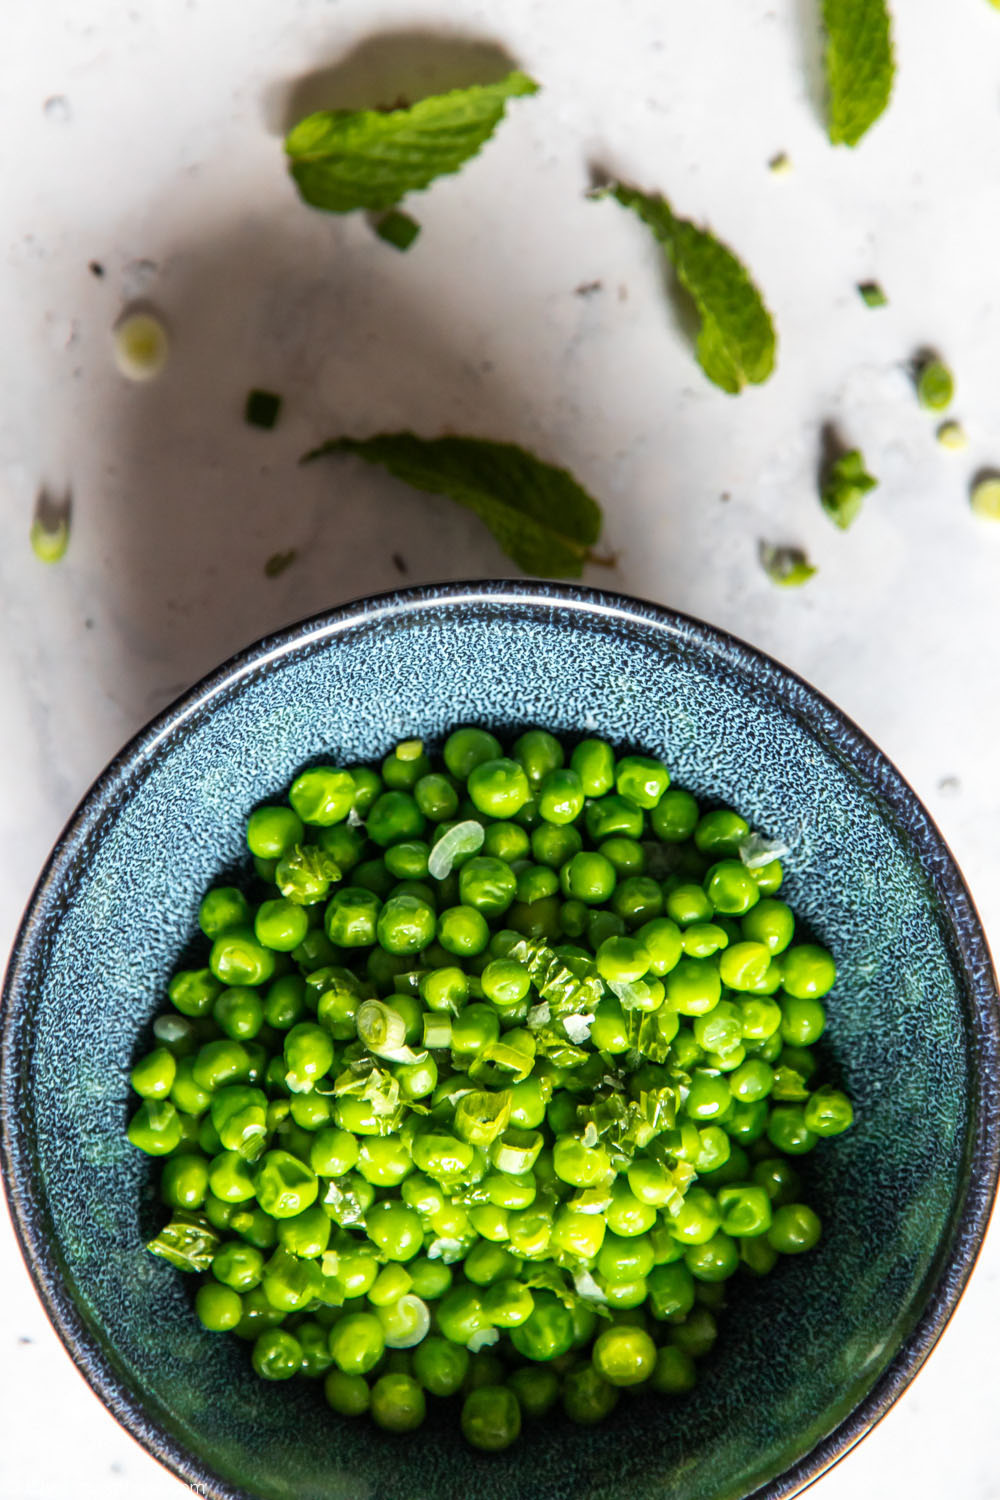 Top view of bowl of peas surrounded by mint and spring onions